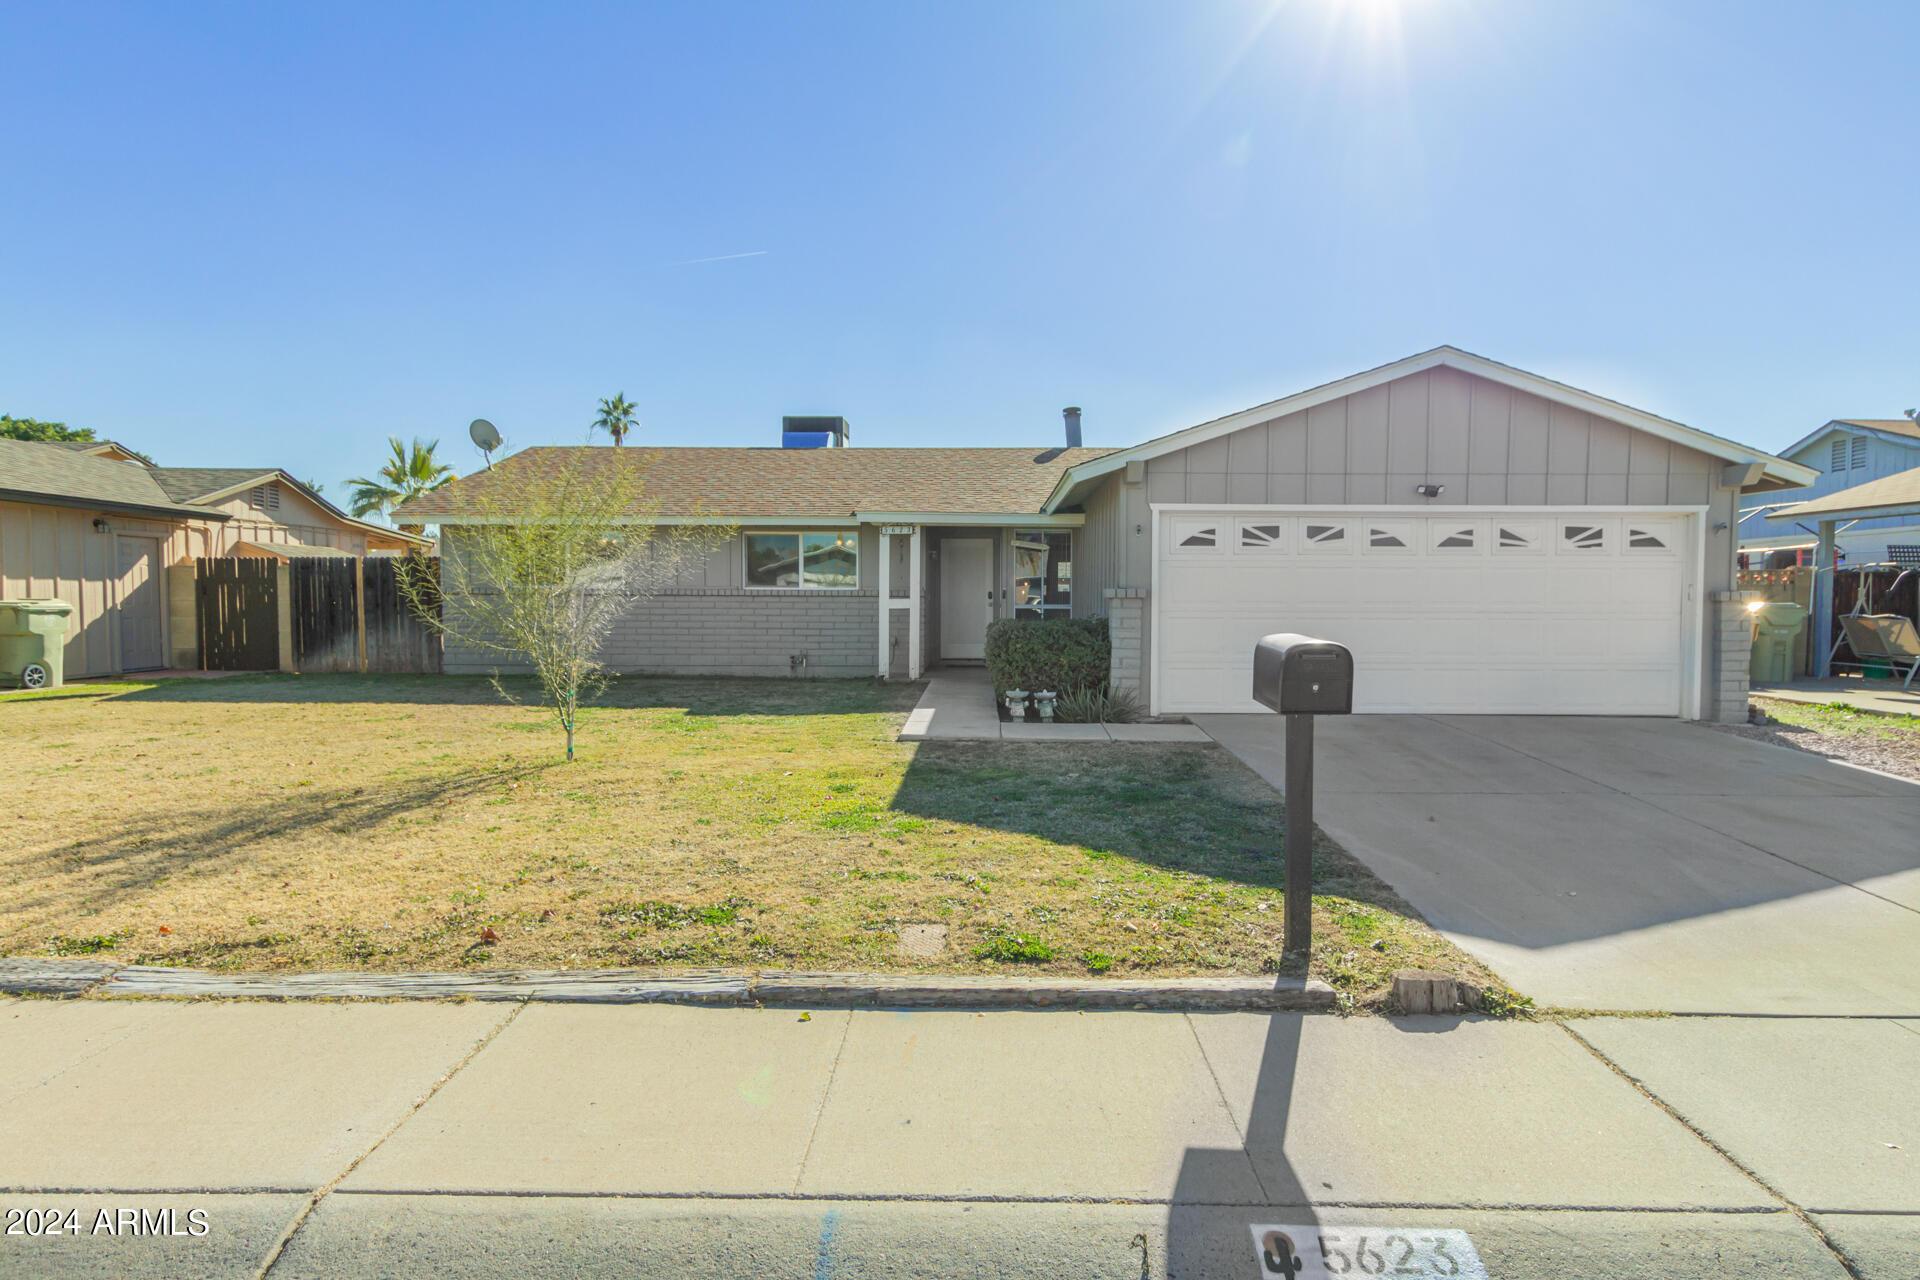 5623 COCHISE, 6648580, Glendale, Single Family - Detached,  for sale, Mountain Sage Realty